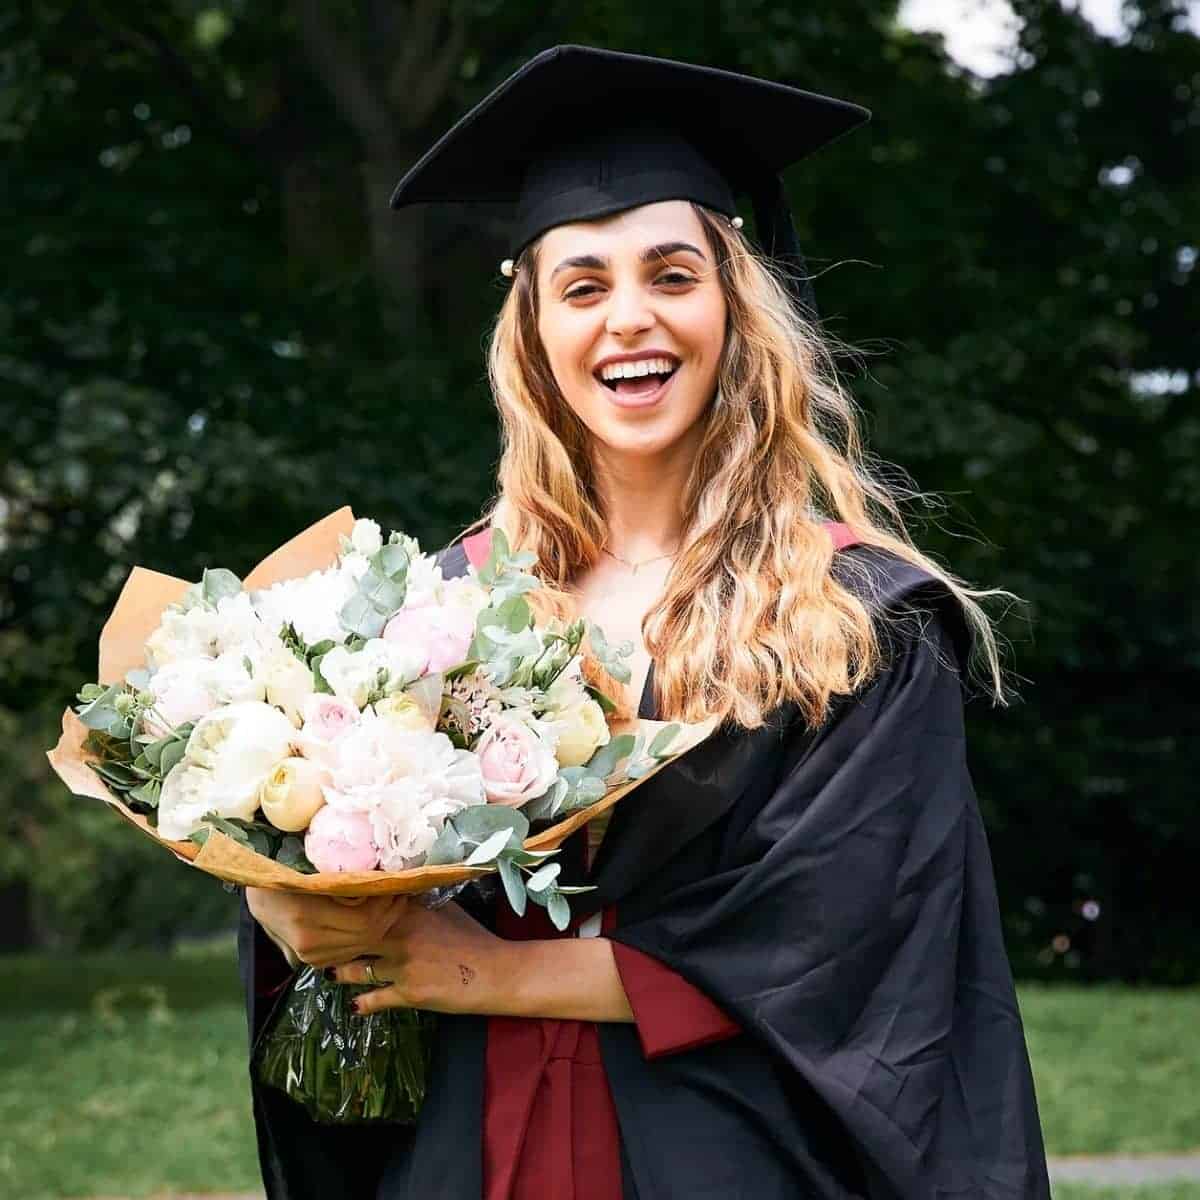 Graduate smiling and holding flowers outdoors.